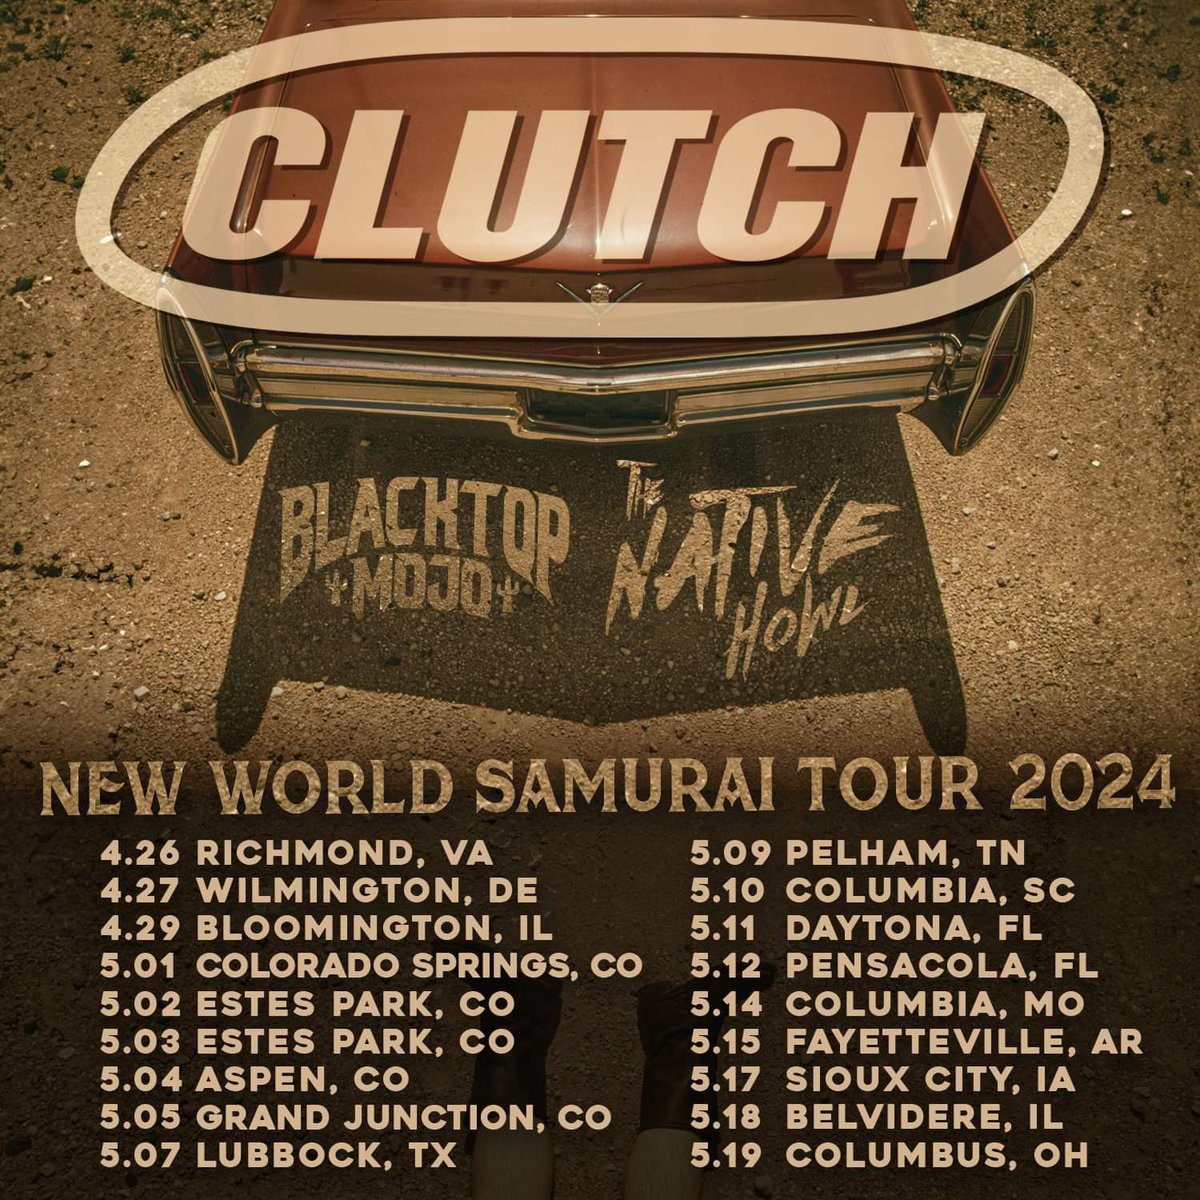 We’ll see y’all out on the road with @clutchofficial and @TheNativeHowl 🤘🤘🤘

Tickets on sale Friday 10am local time